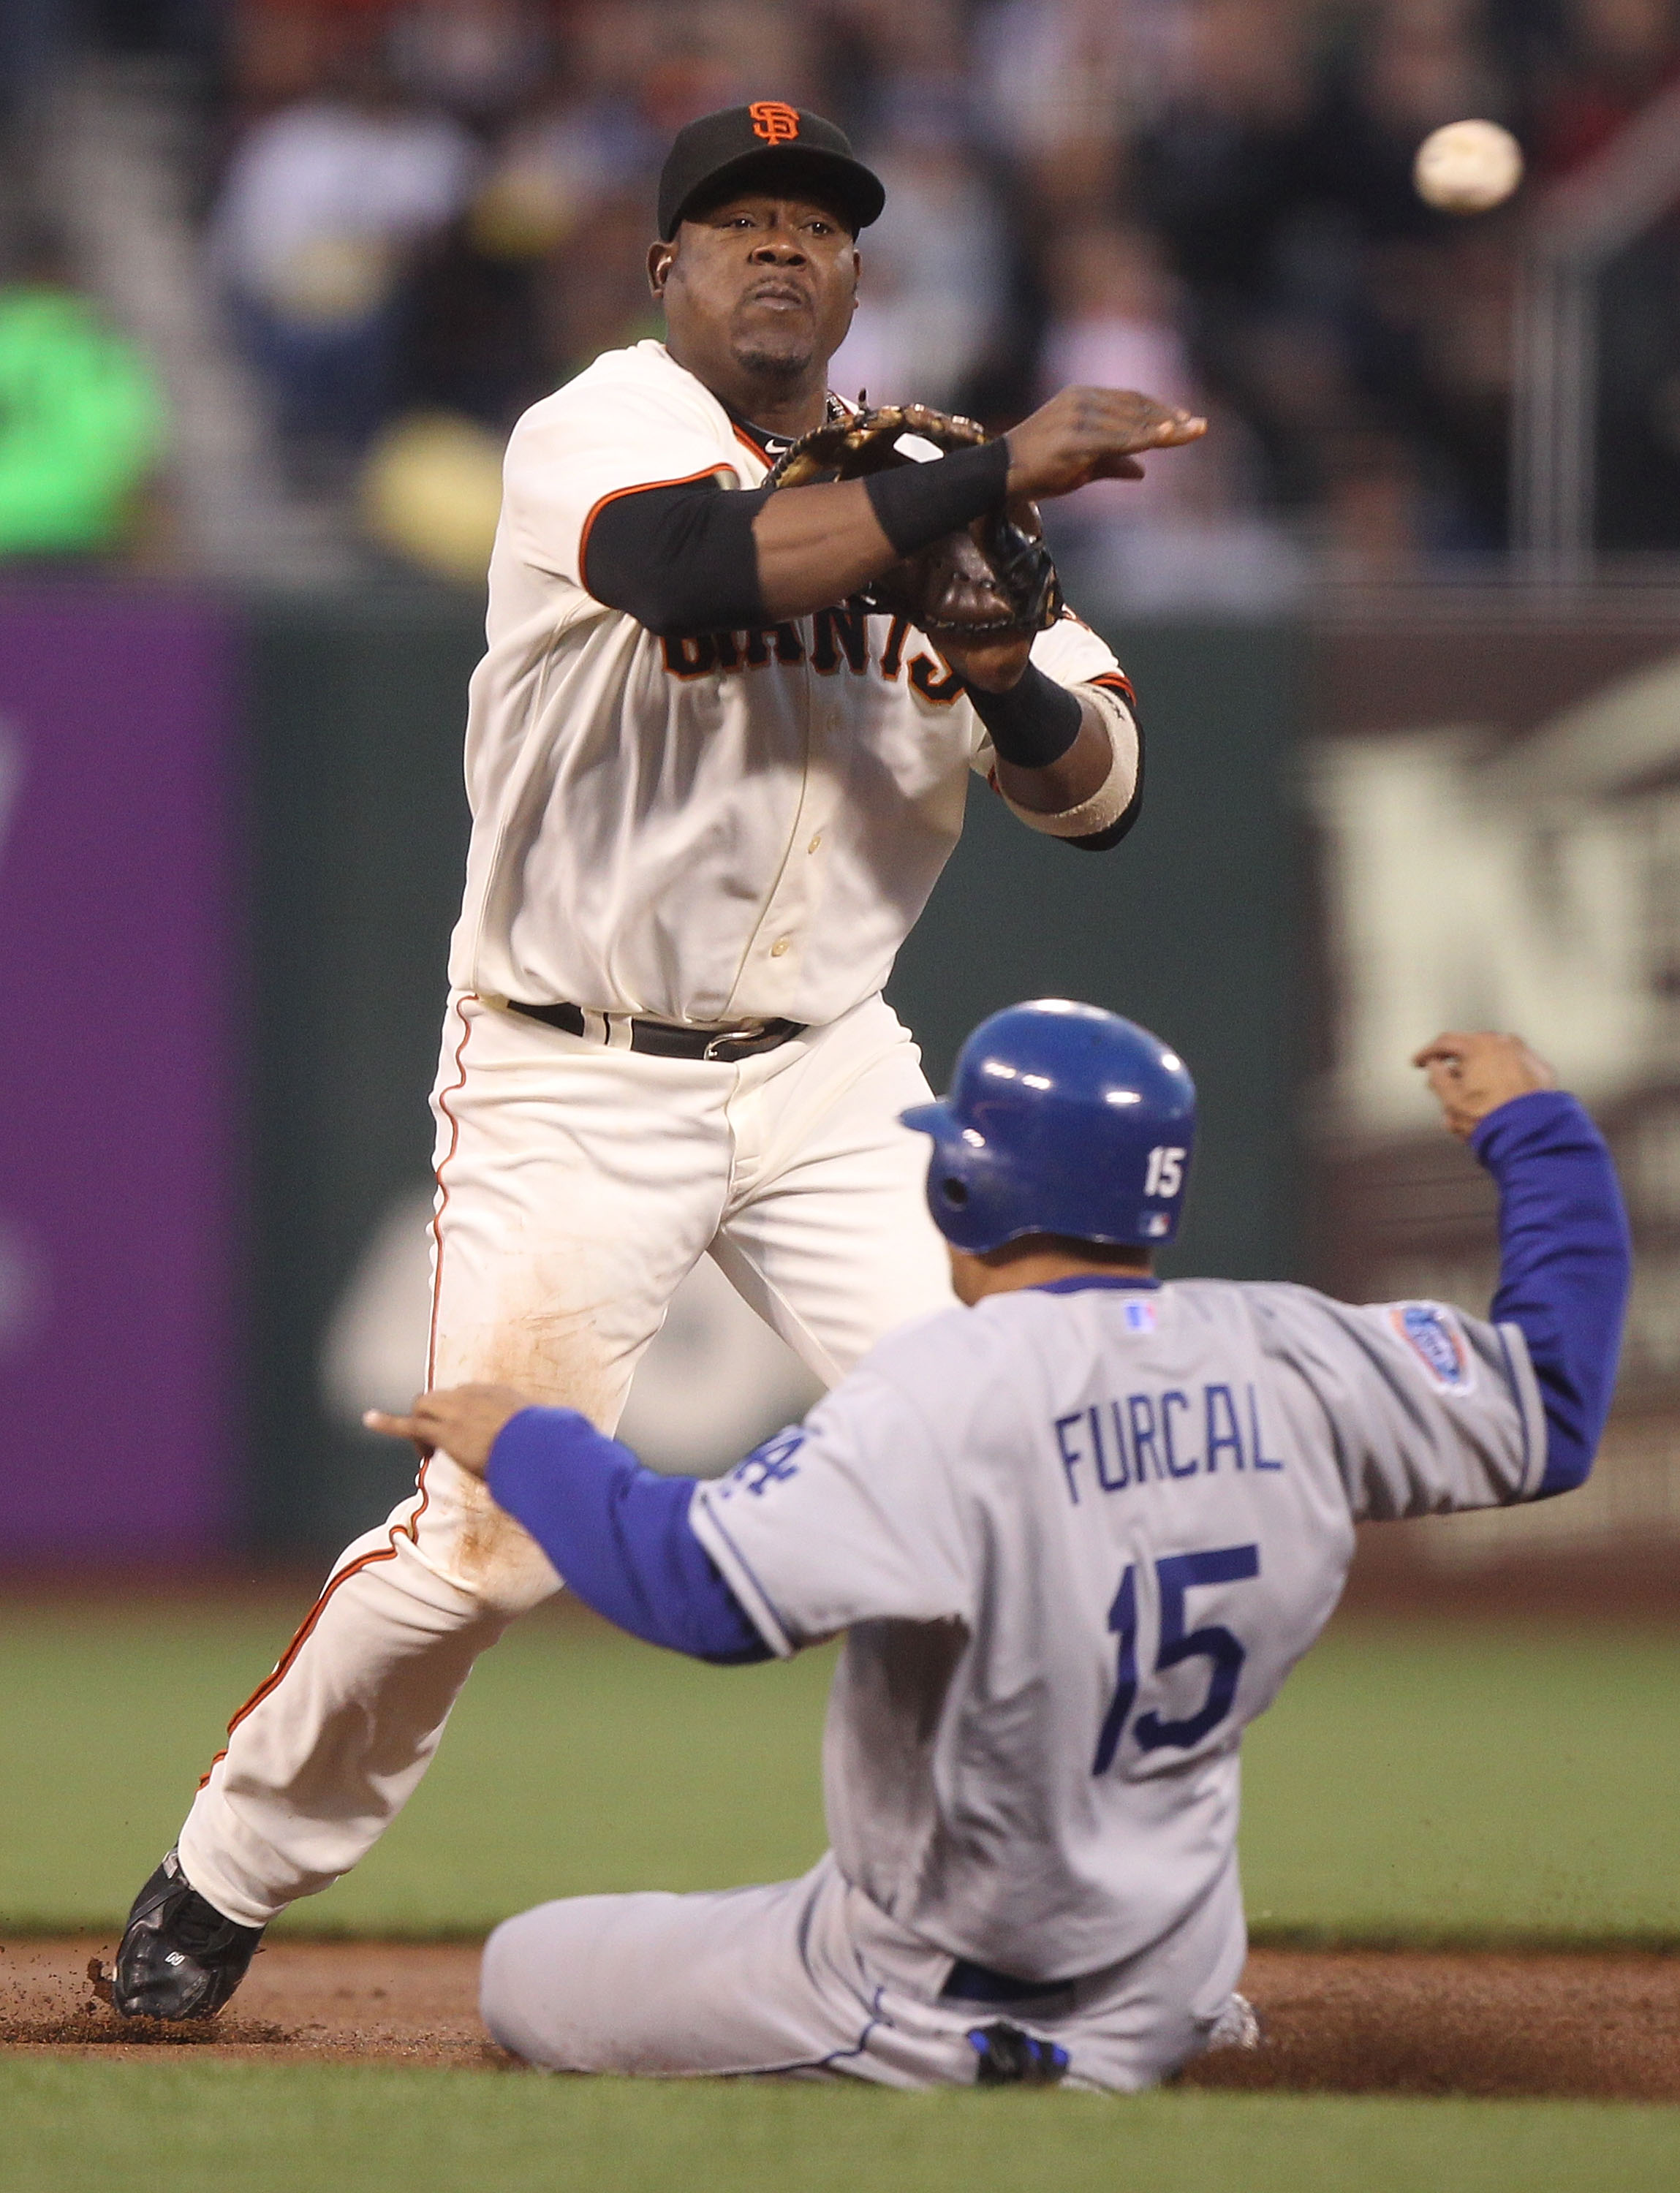 SAN FRANCISCO - SEPTEMBER 14:  Juan Uribe #5 of the San Francisco Giants throws to first as Rafael Furcal #15 of the Los Angeles Dodgers slides into second on a double play ball hit by Andre Ethier in the first inning during a Major League Baseball game a